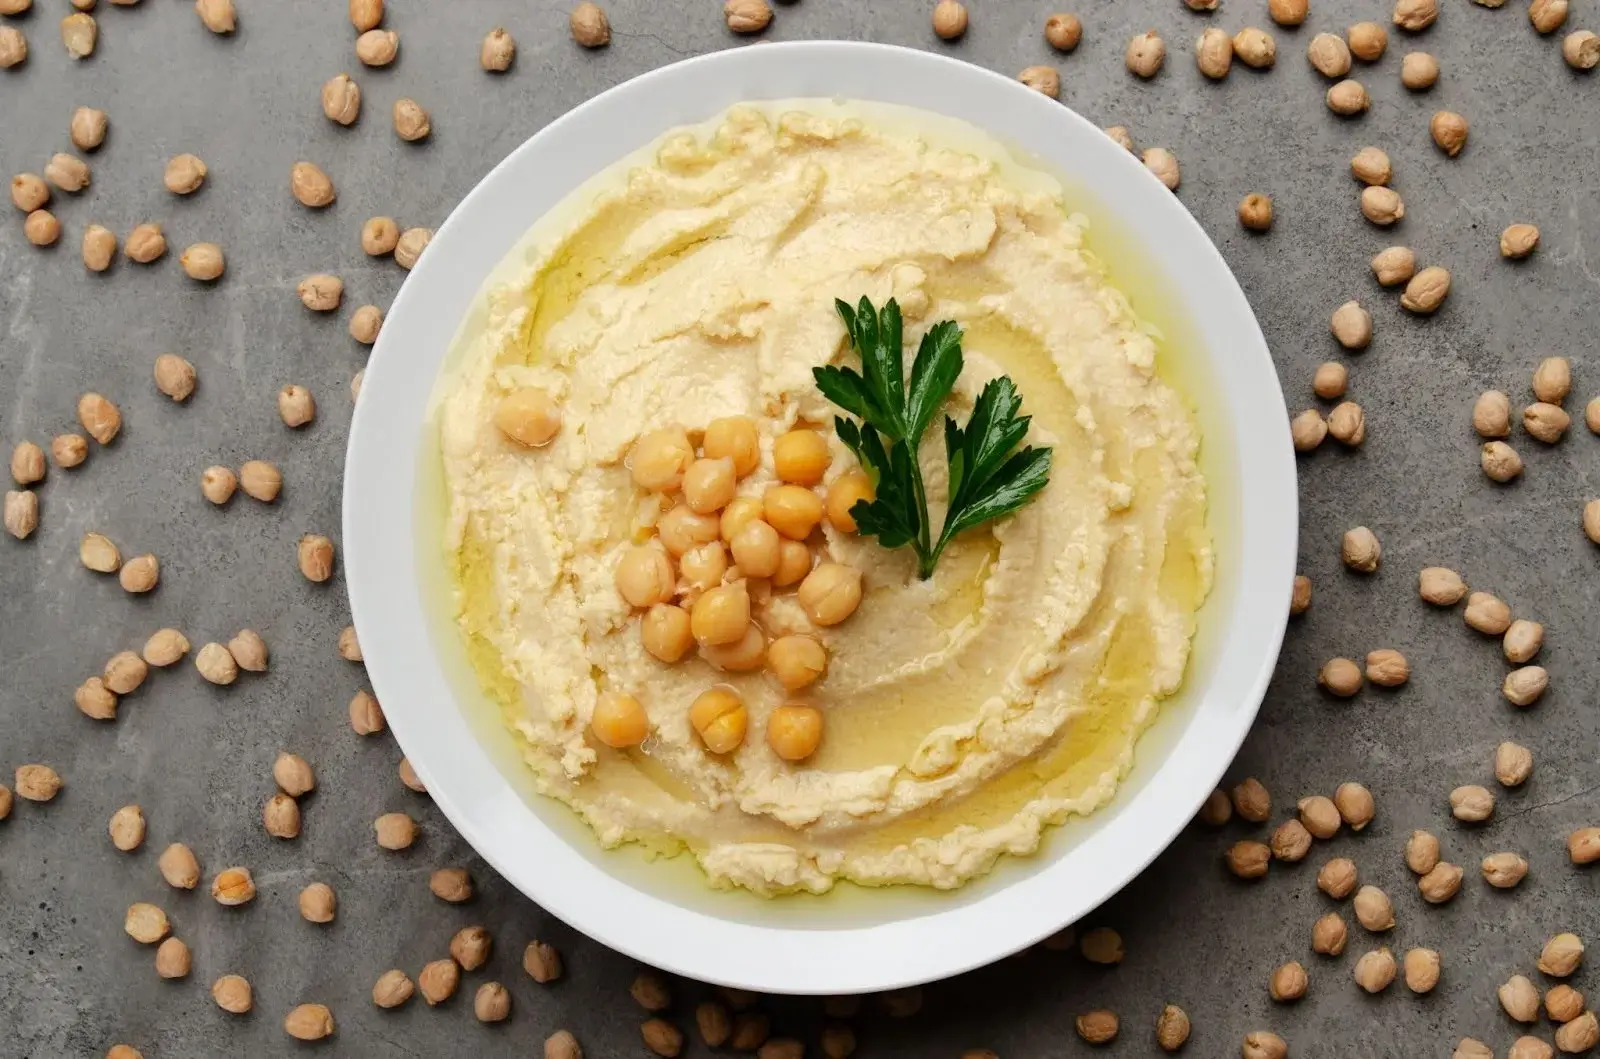 Traditional hummus, a popular chickpea-based dish at Aladdin Mediterranean Cuisine in Houston